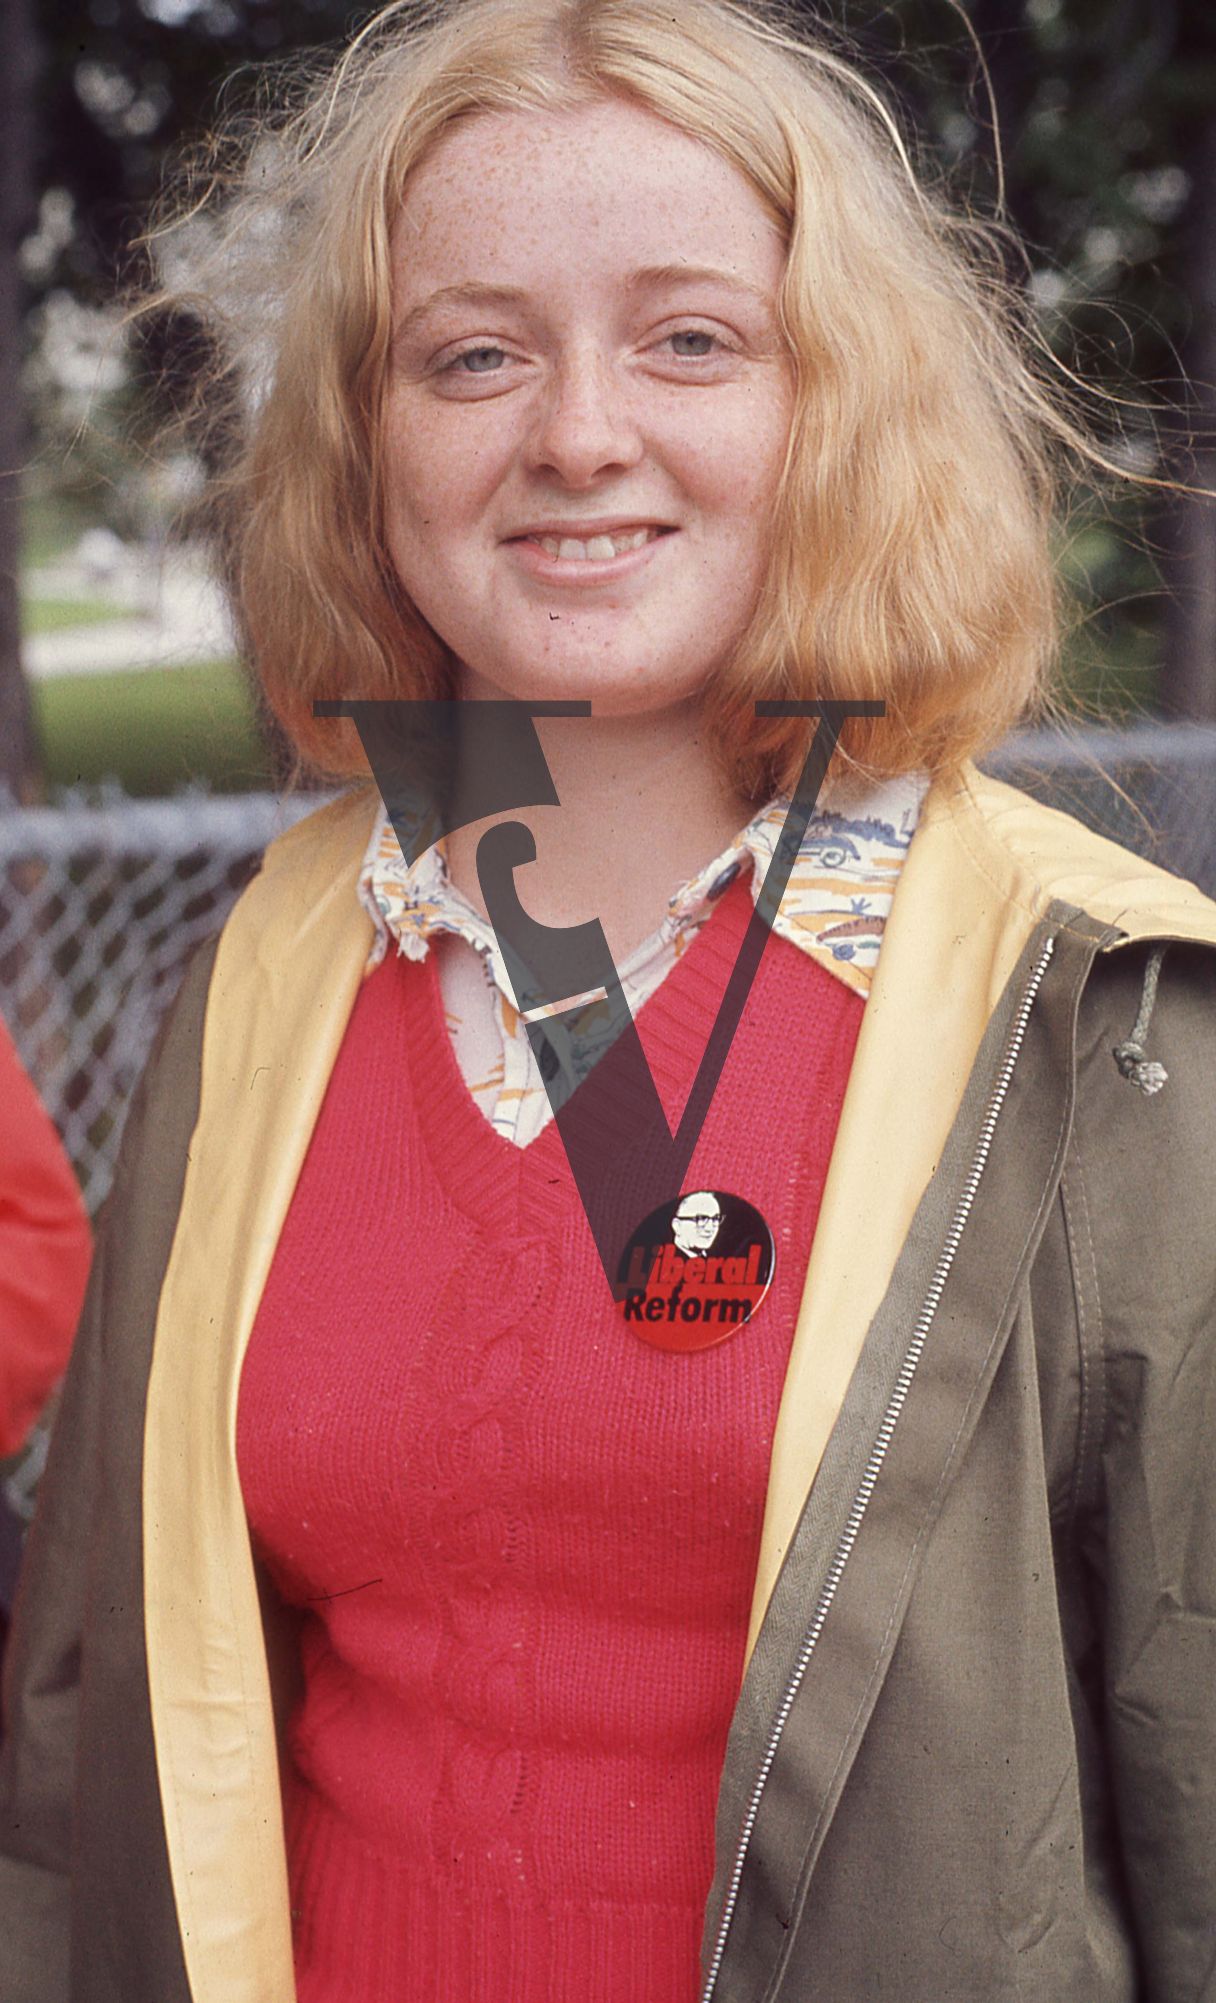 Newfoundland, Girl smiles with Joey Smallwood, Liberal Reform button.